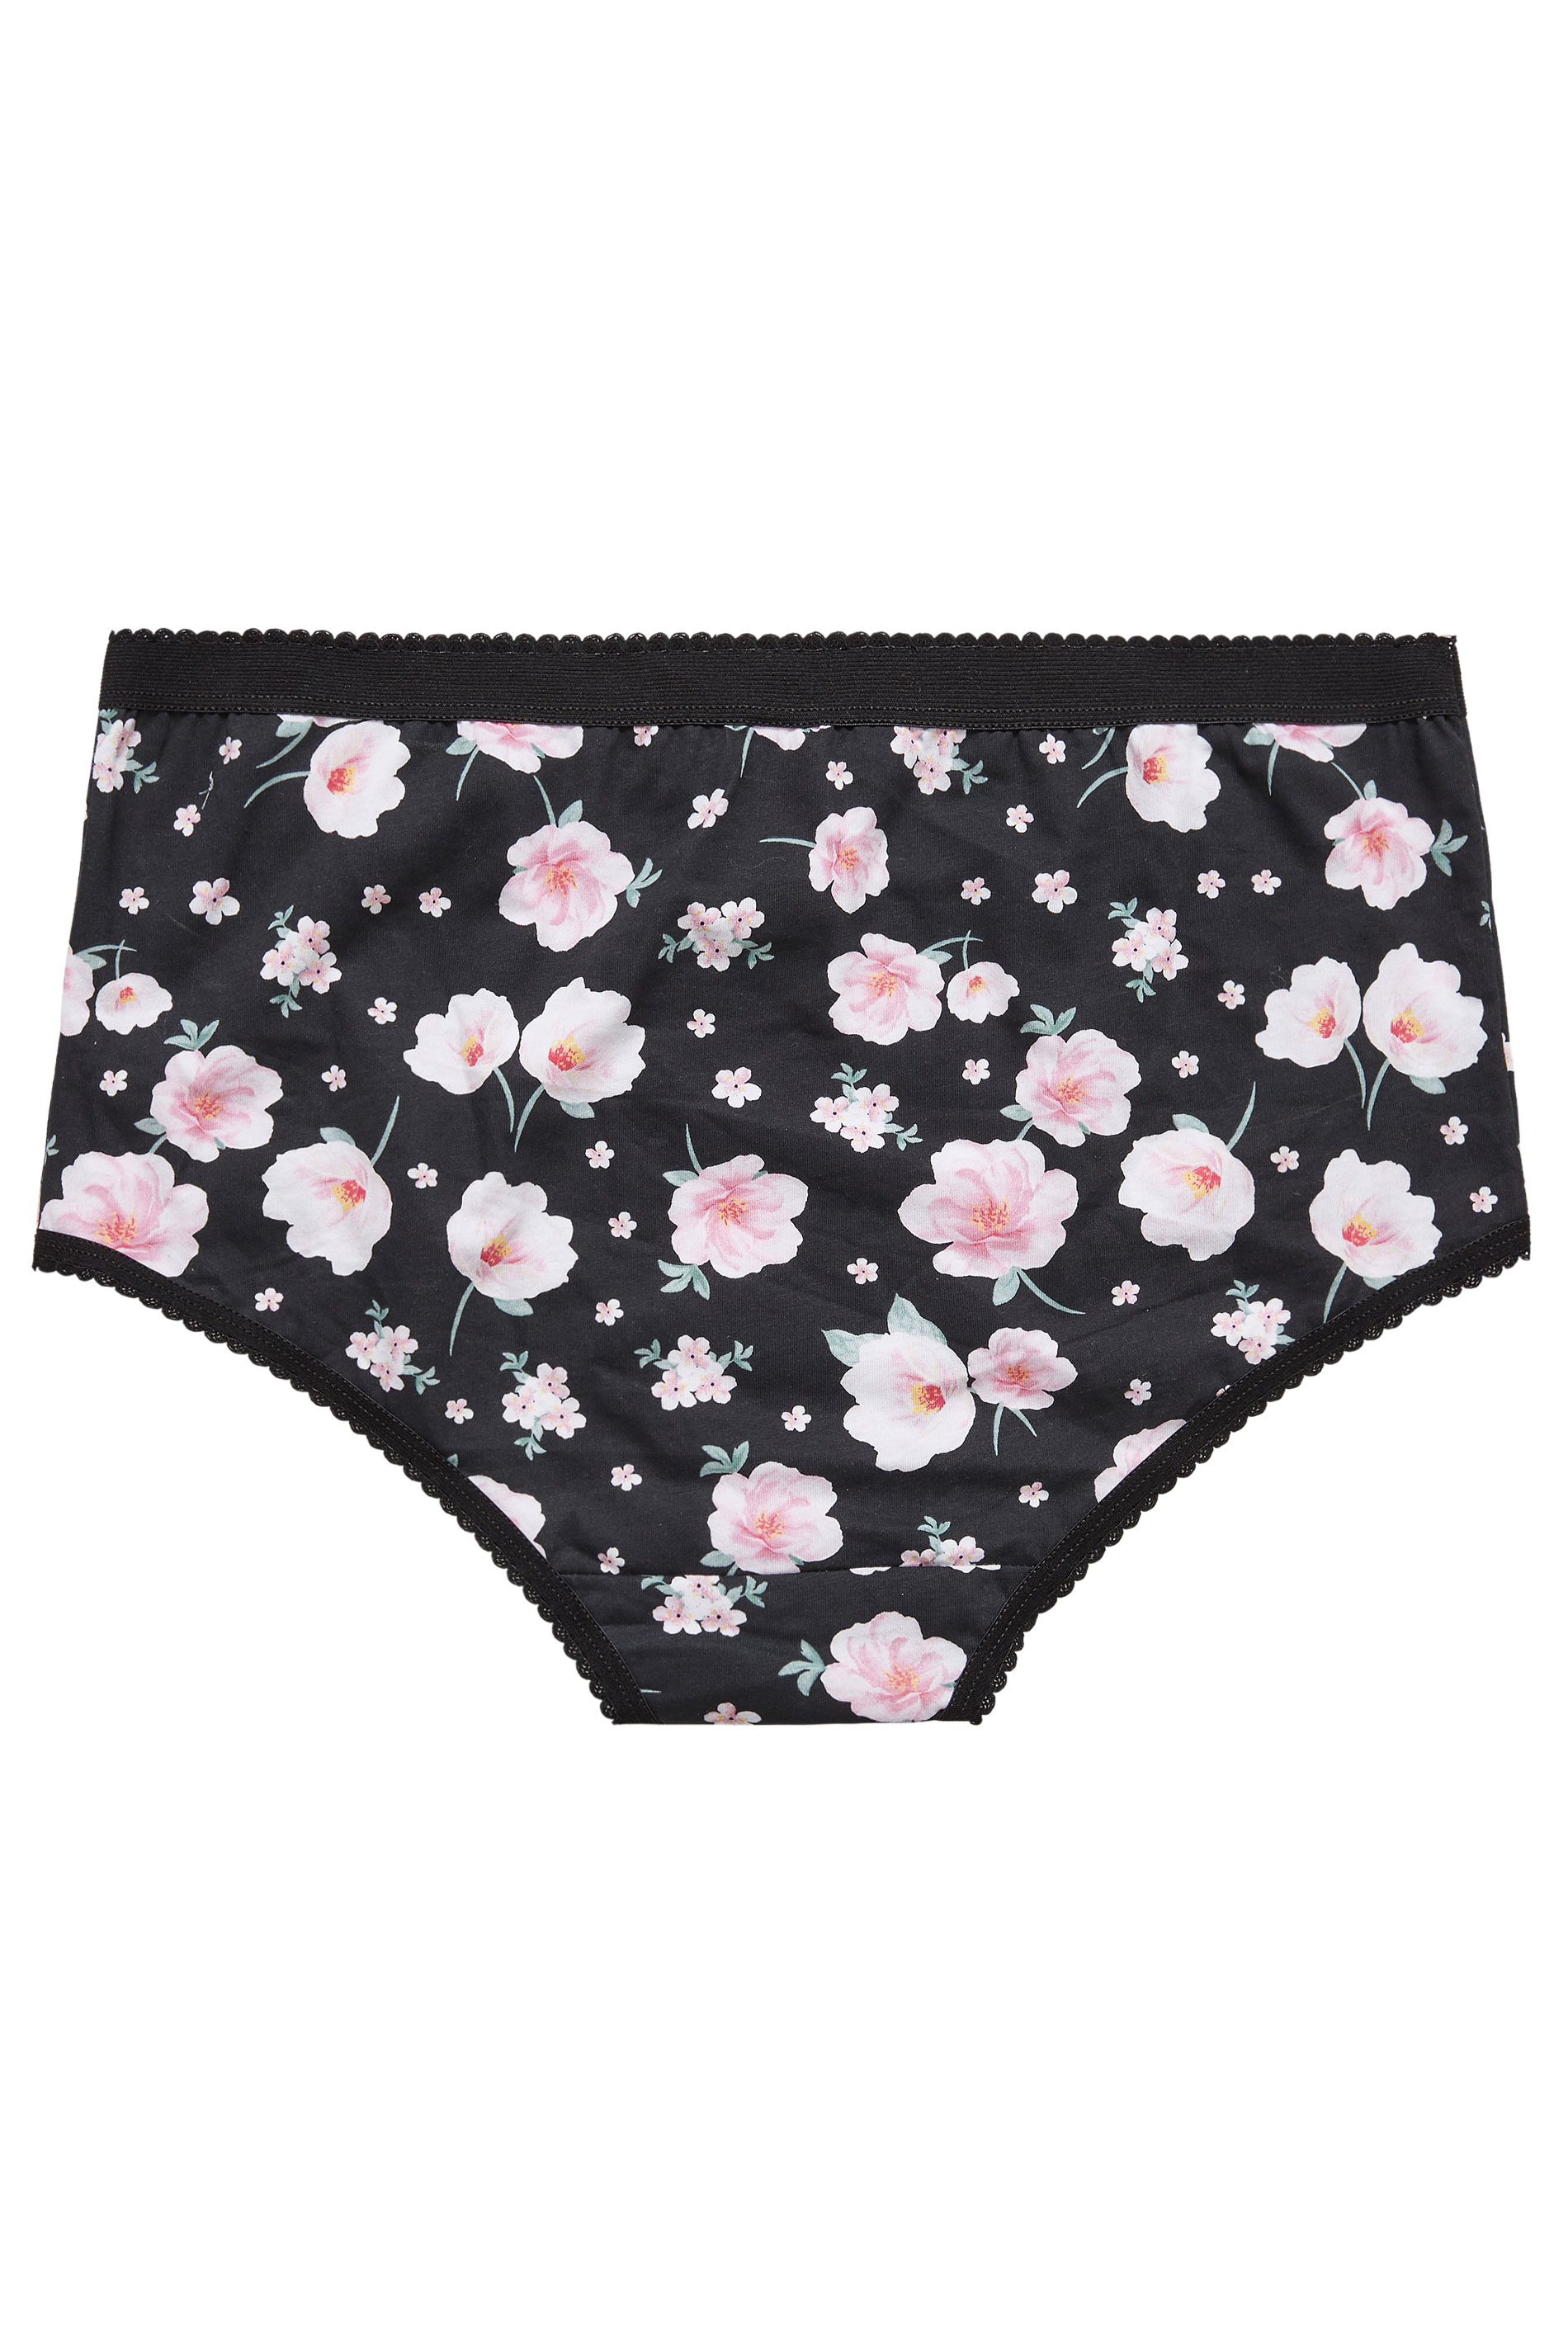 5 PACK Black Large Floral Print Full Briefs | Yours Clothing